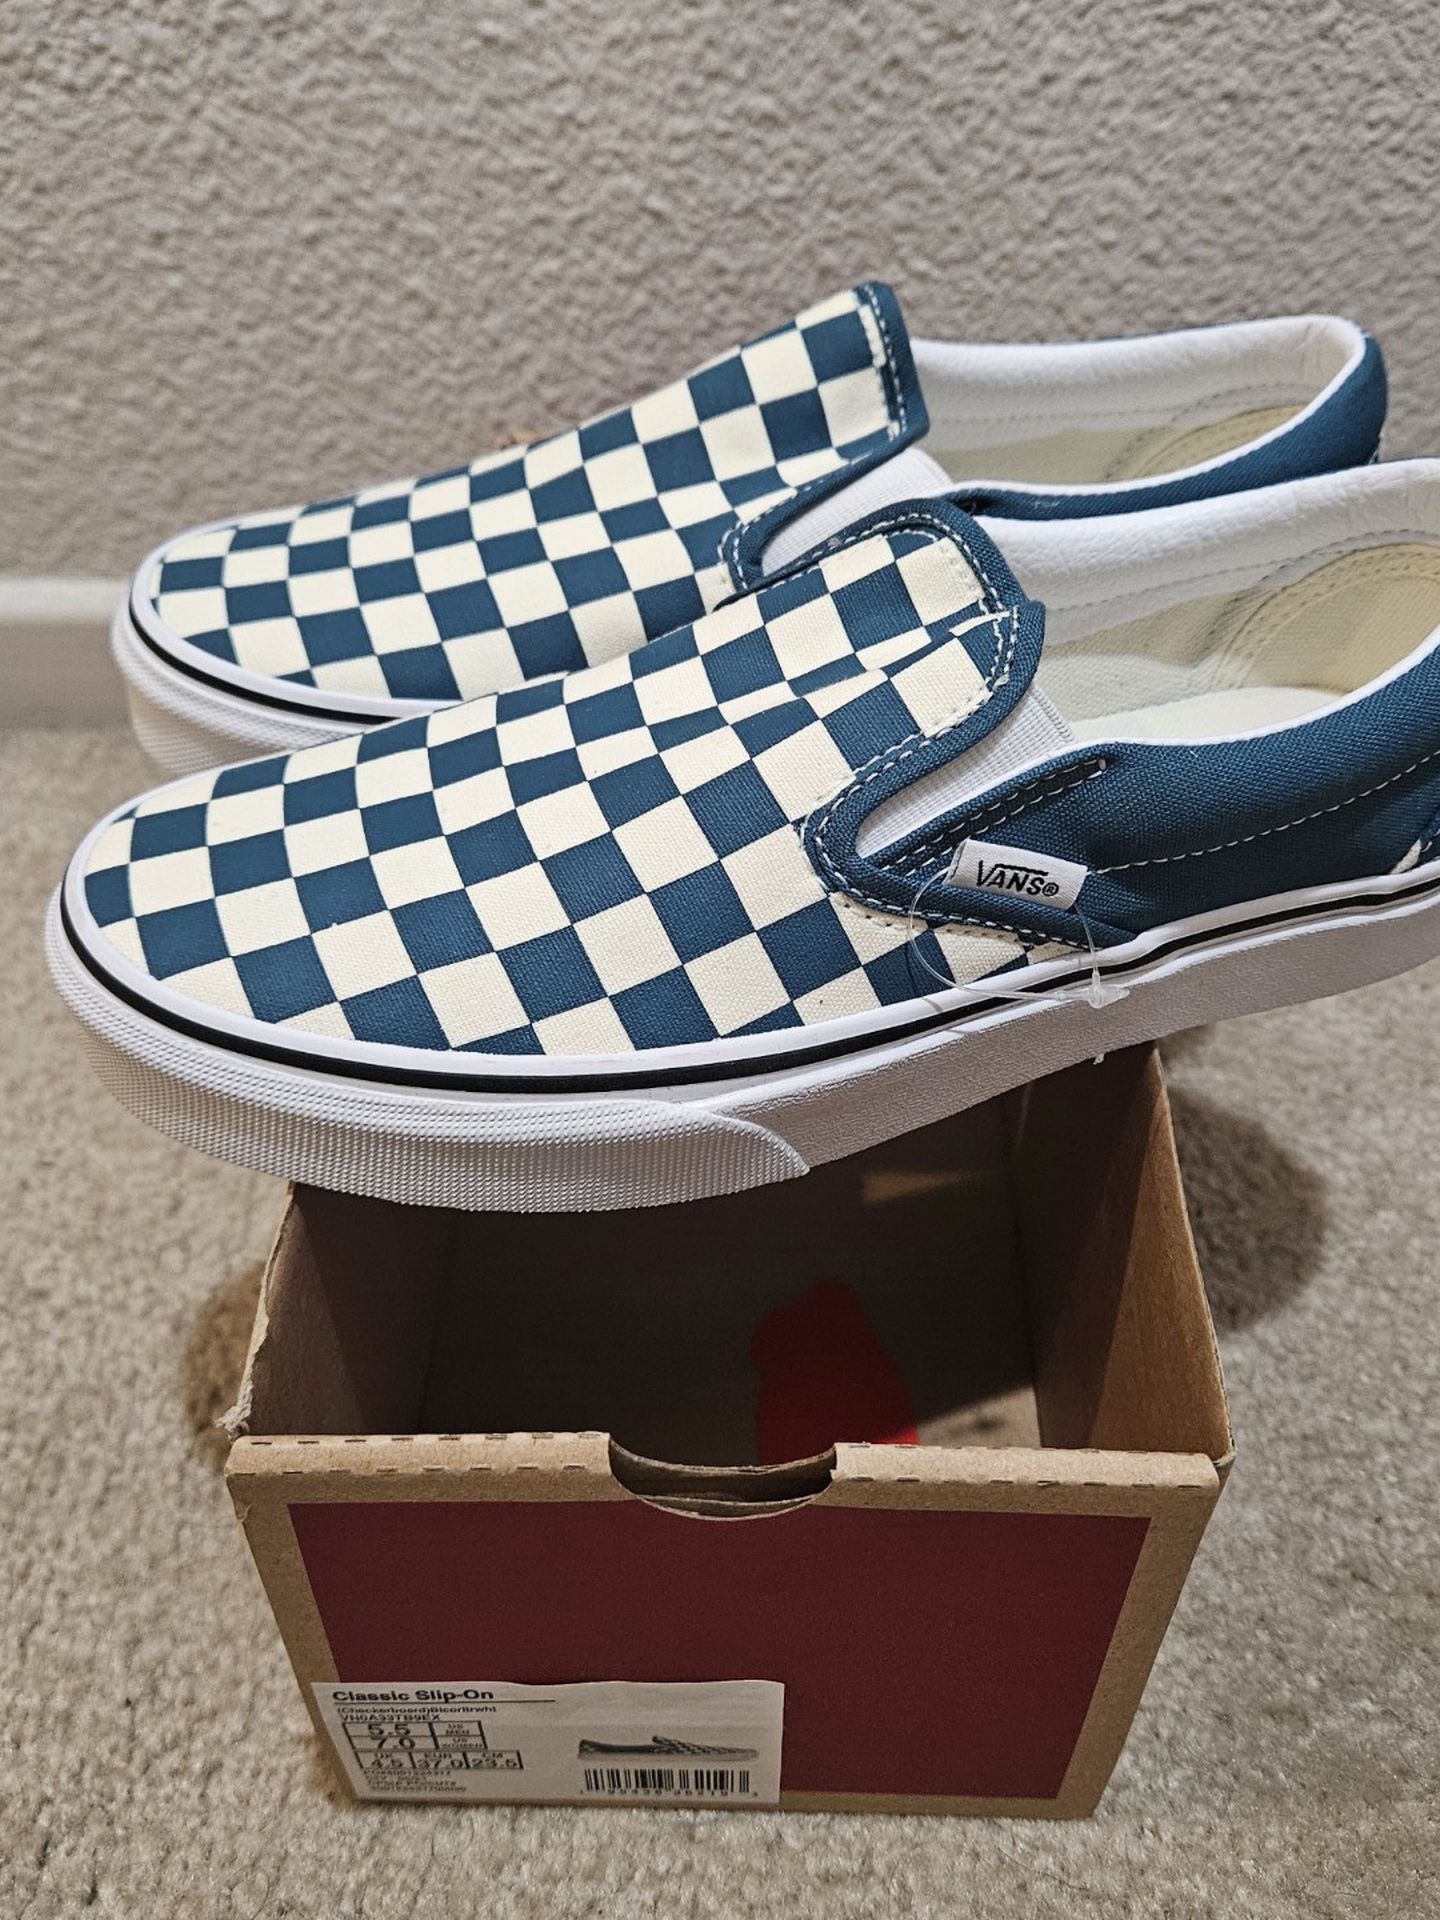 BRAND NEW WOMENS VANS SLIP-ON TEAL CHECKERBOARD SIZE 7